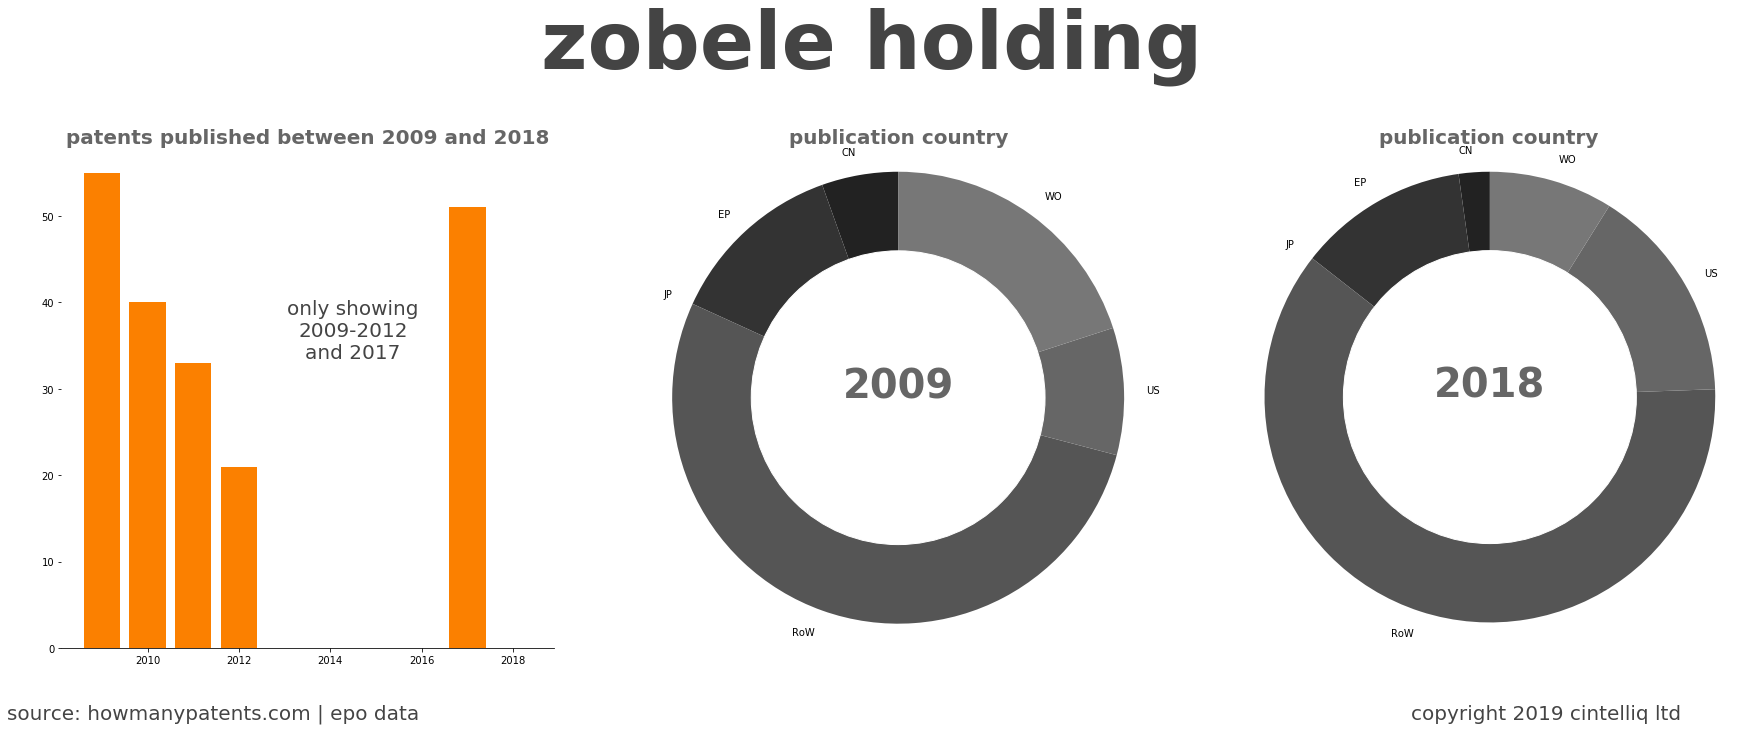 summary of patents for Zobele Holding